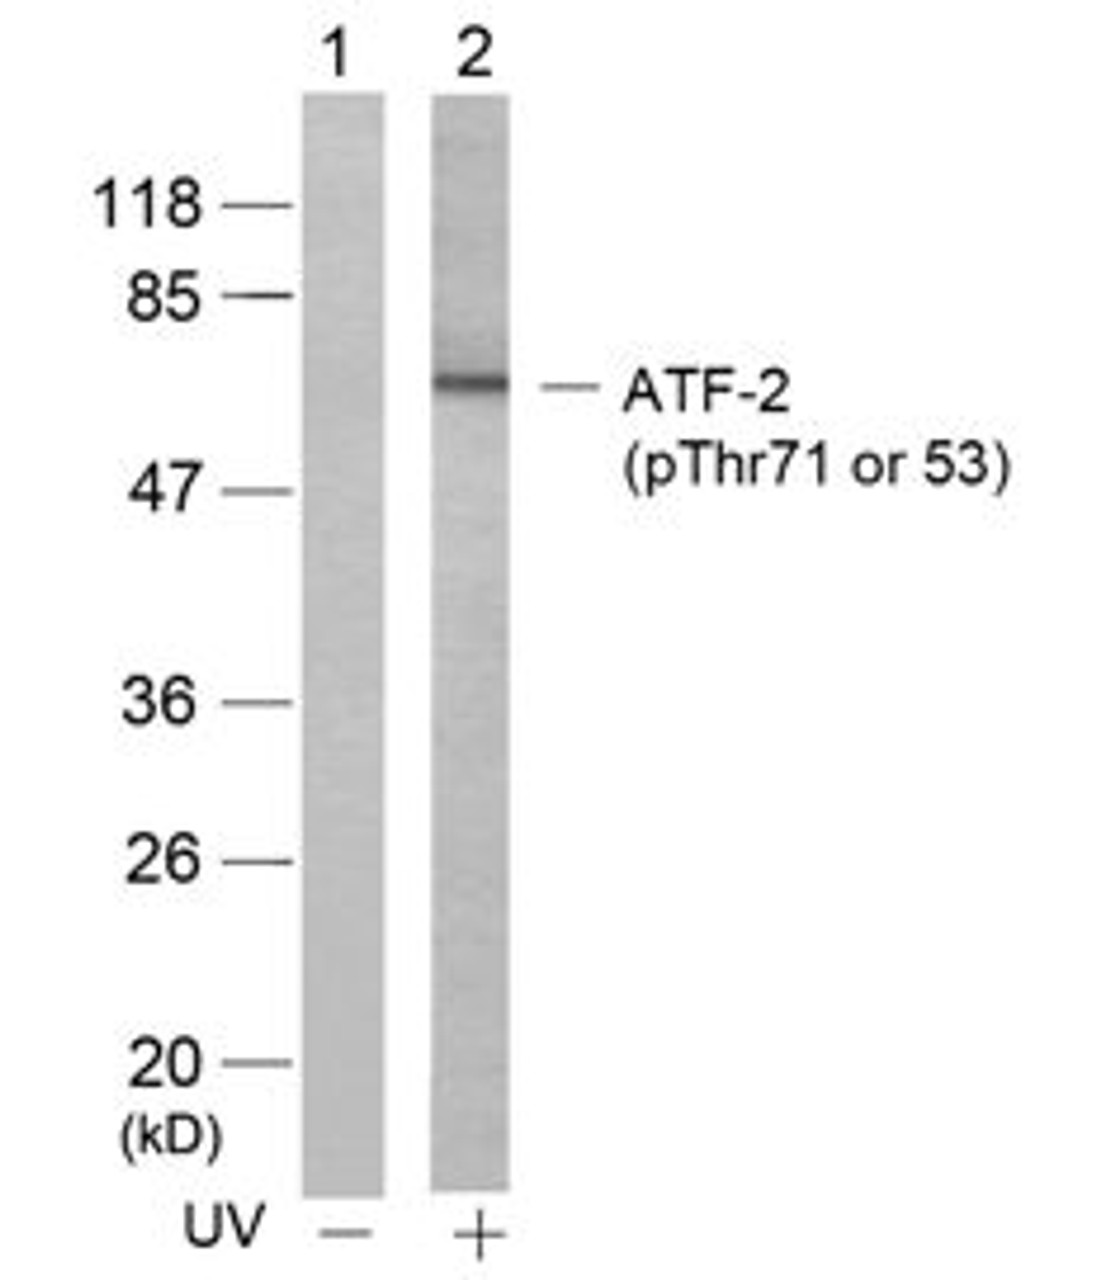 Western blot analysis of lysed extracts from HeLa cells untreated (Lane 1) or treated with UV (lane 2) using ATF2 (Phospho-Thr71 or 53) .